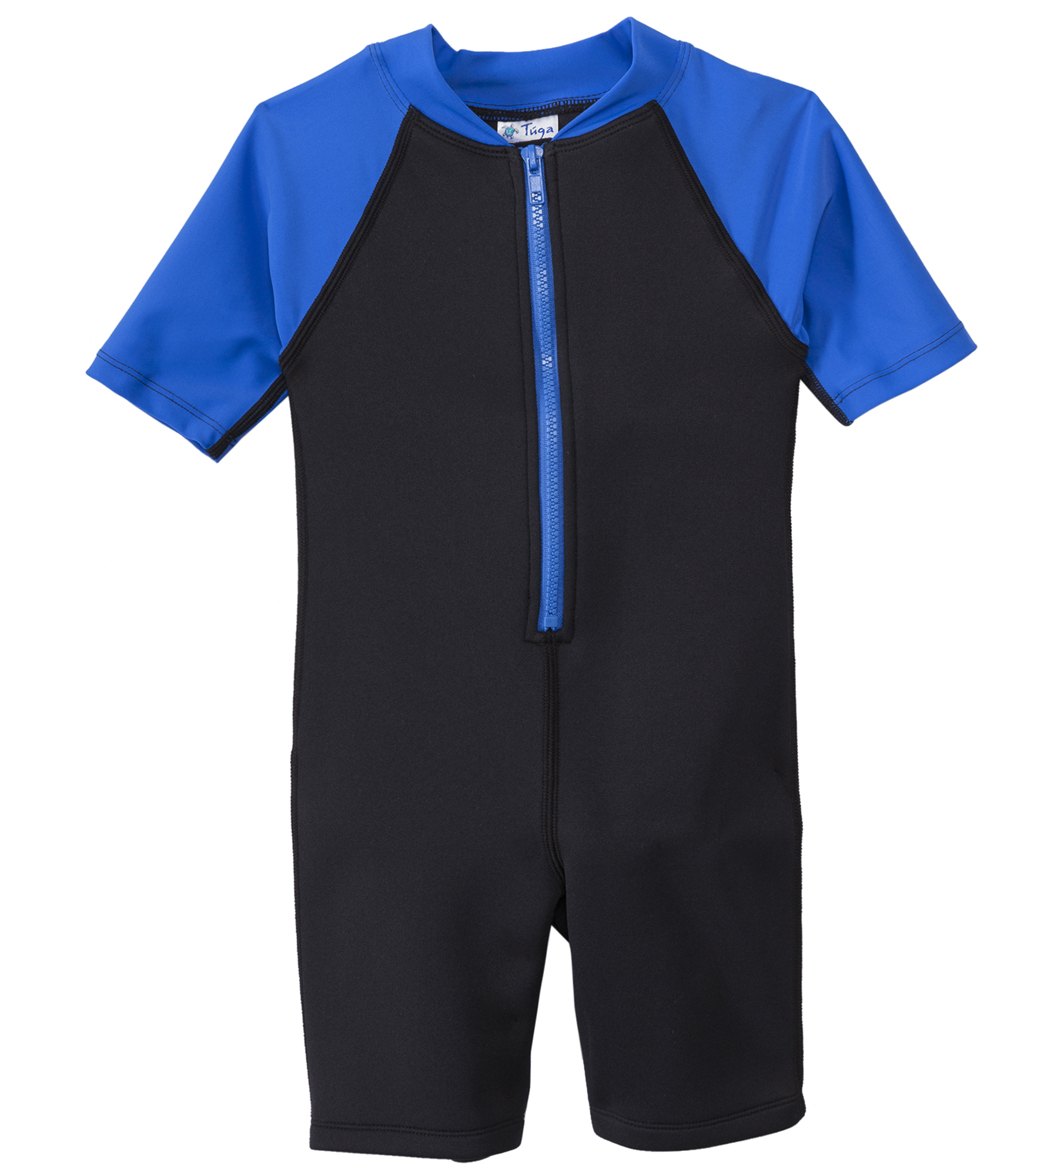 Tuga Kids' Thermal Suit 1-14 Years - Royal 4 Years Lycra®/Nylon - Swimoutlet.com